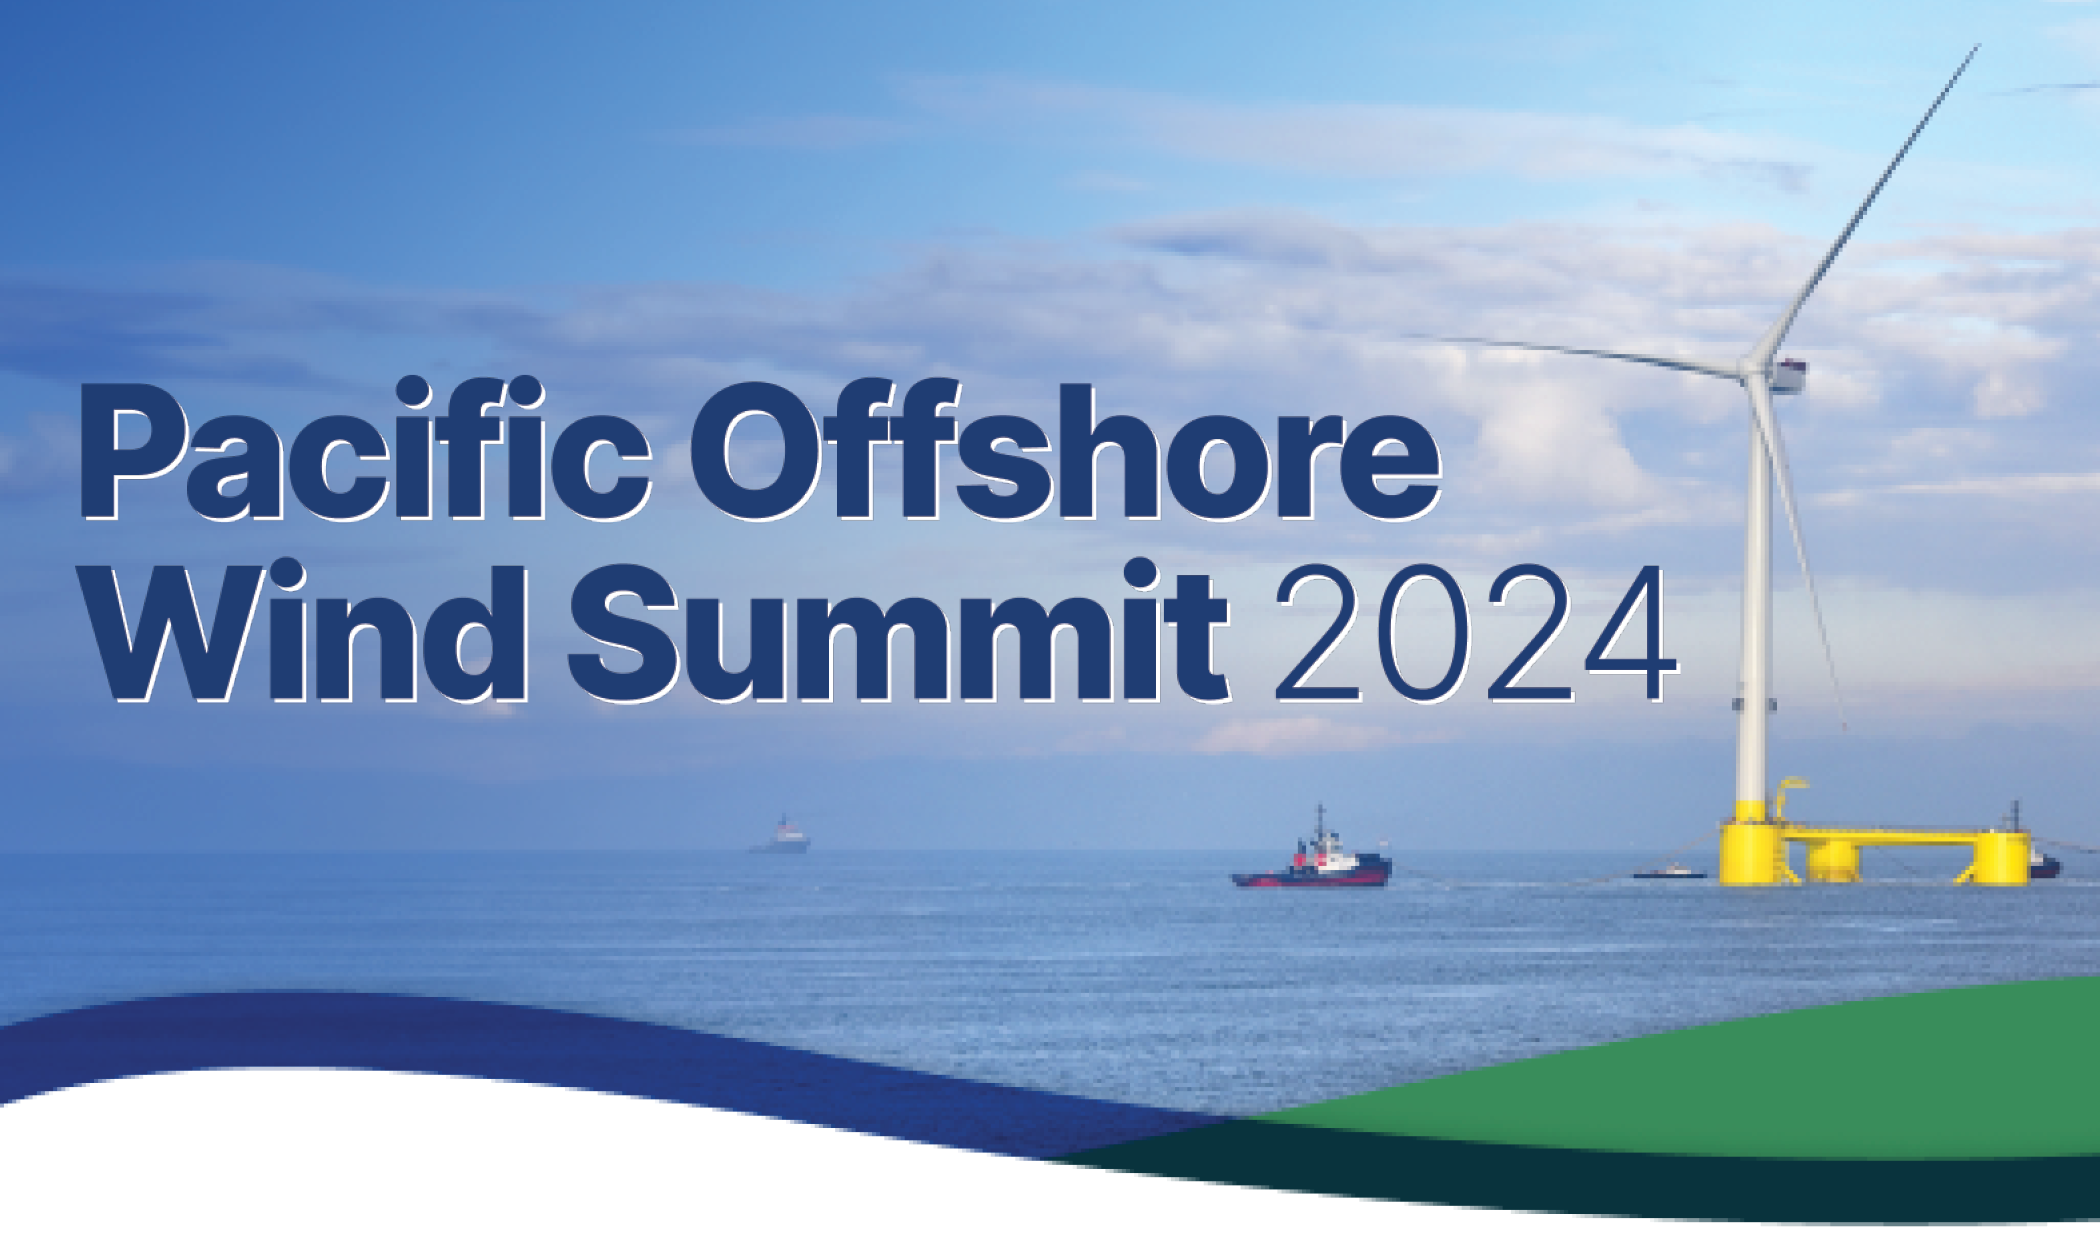 Pacific Offshore Wind Summit 2024